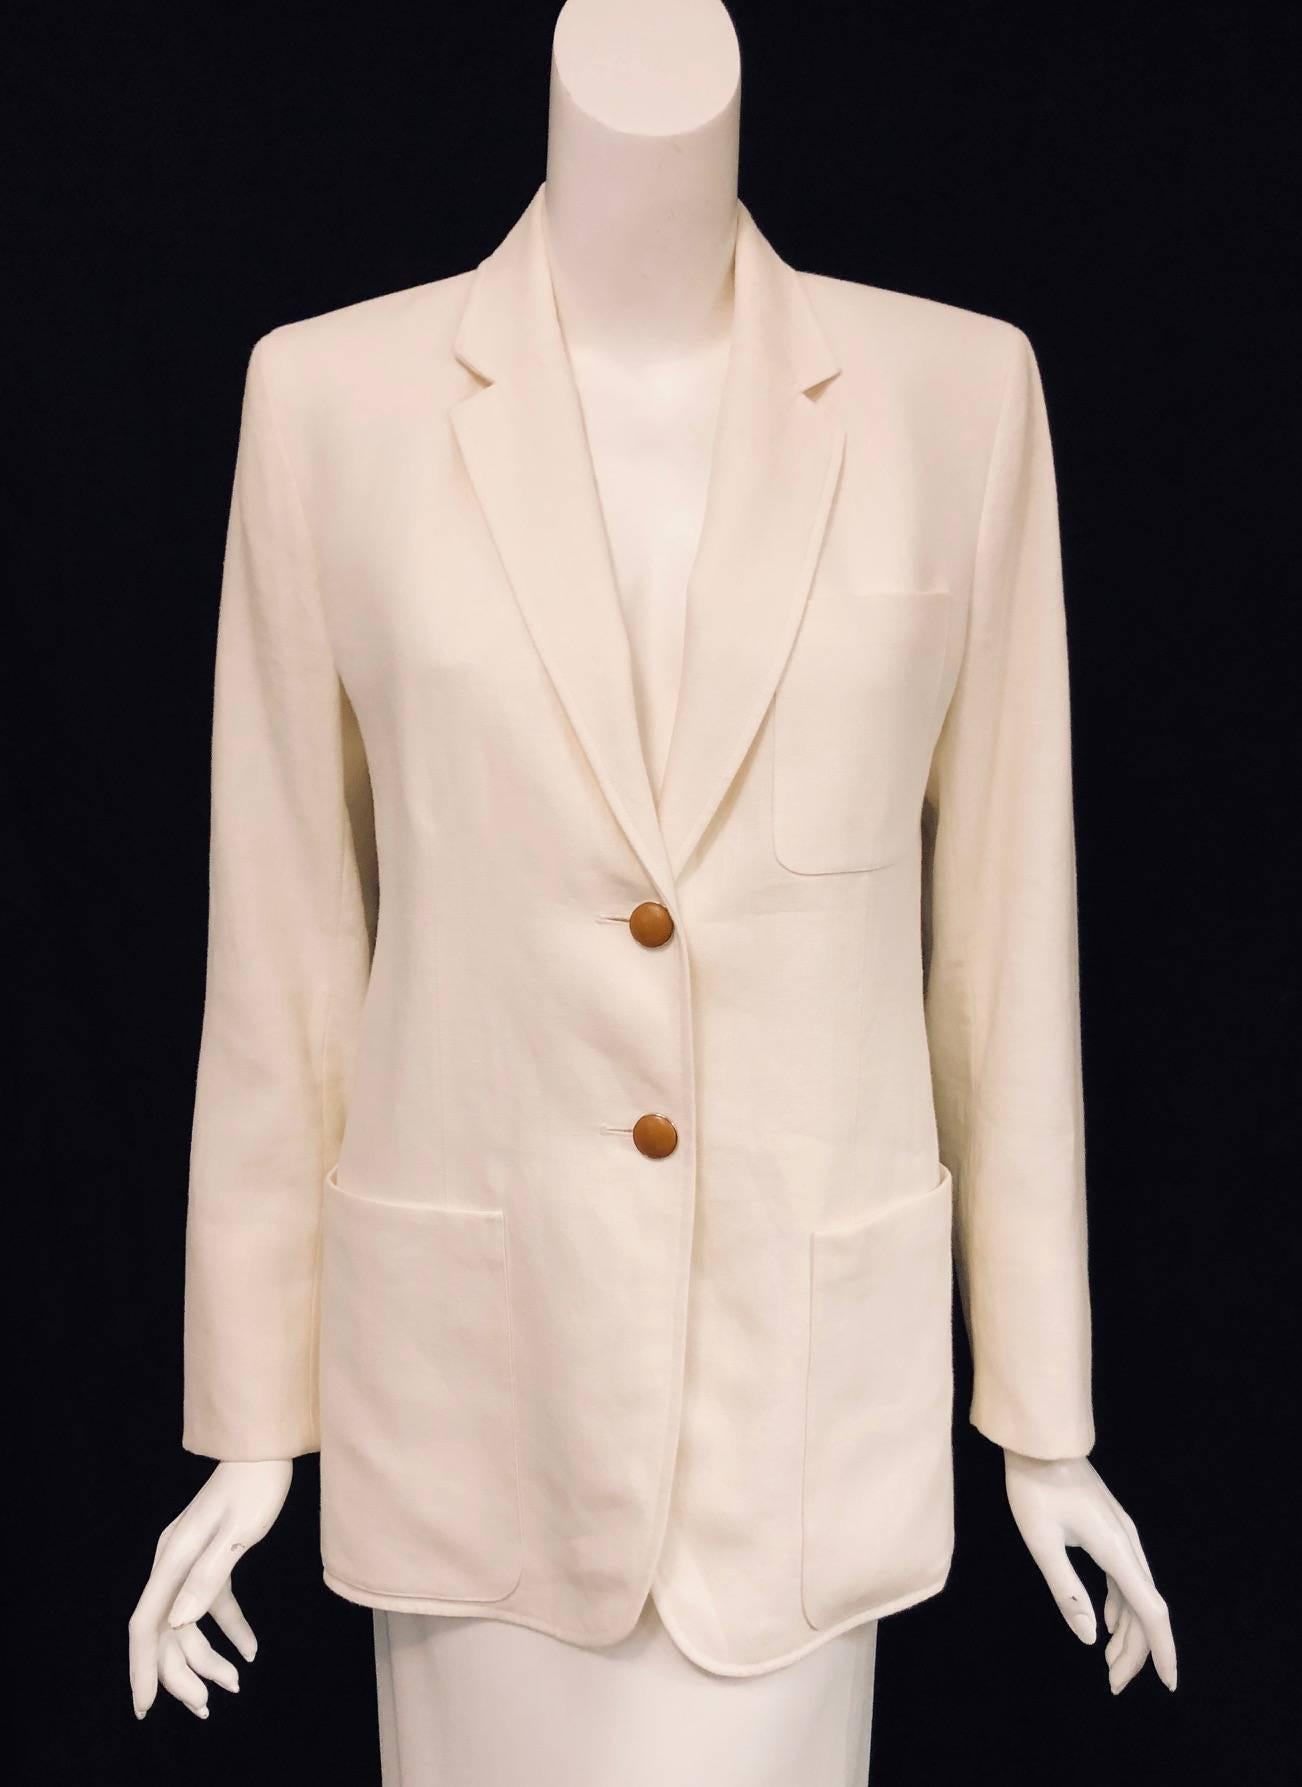 This elegant Hermes jacket is crisp, light and airy.  Features soft ivory linen with two tan leather covered buttons at front of jacket.  Cuffs are fished with four of these same leather covered buttons.  Notch collar and 2 patch pockets completes